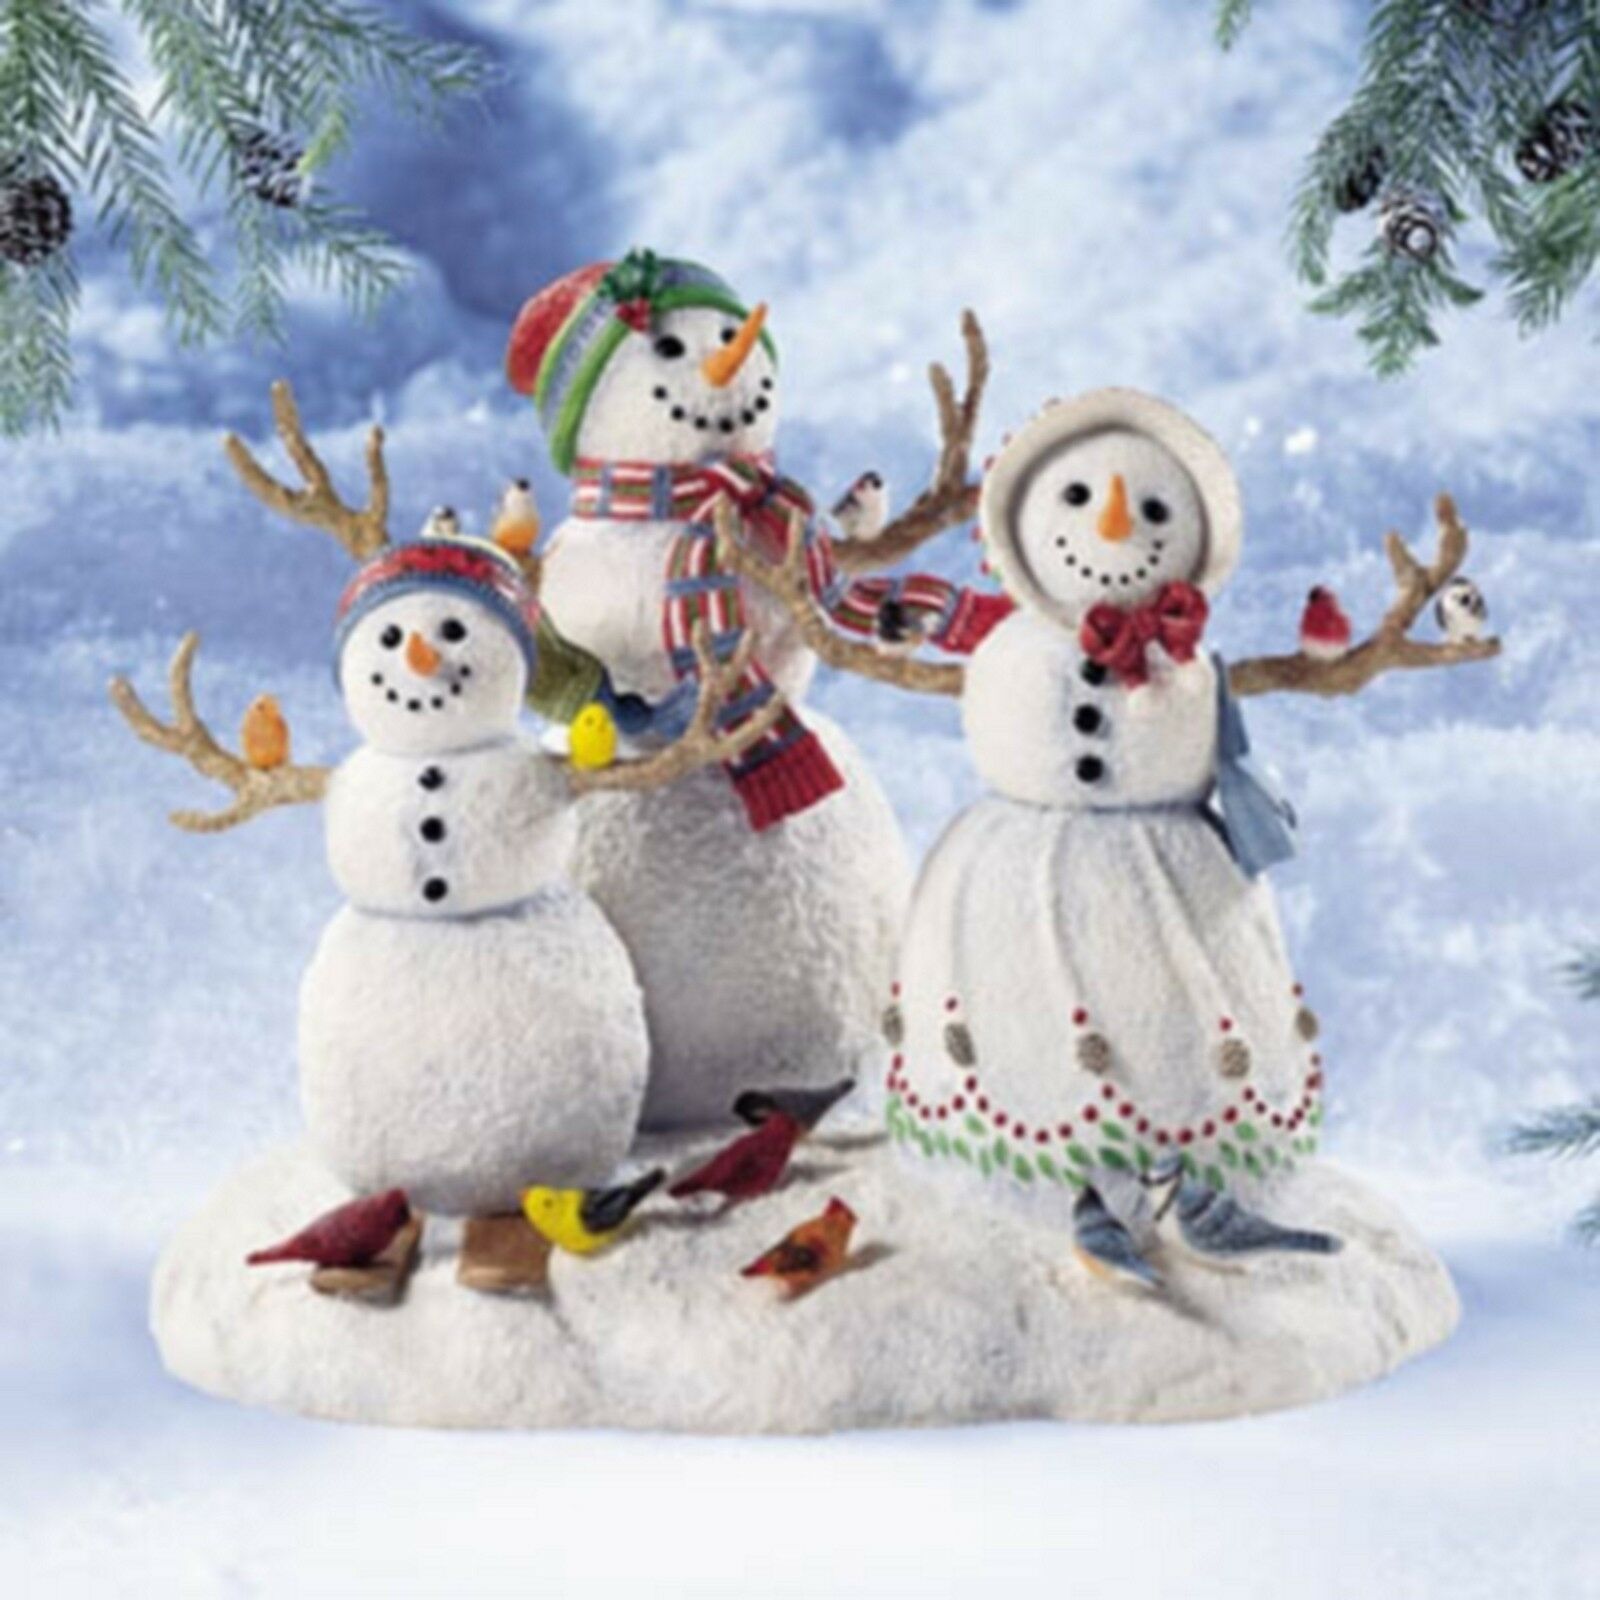 NEW! Lenox Birds of a Feather Snowman Family Sculpture-Snow Kids-Lynn Bywaters - $81.08